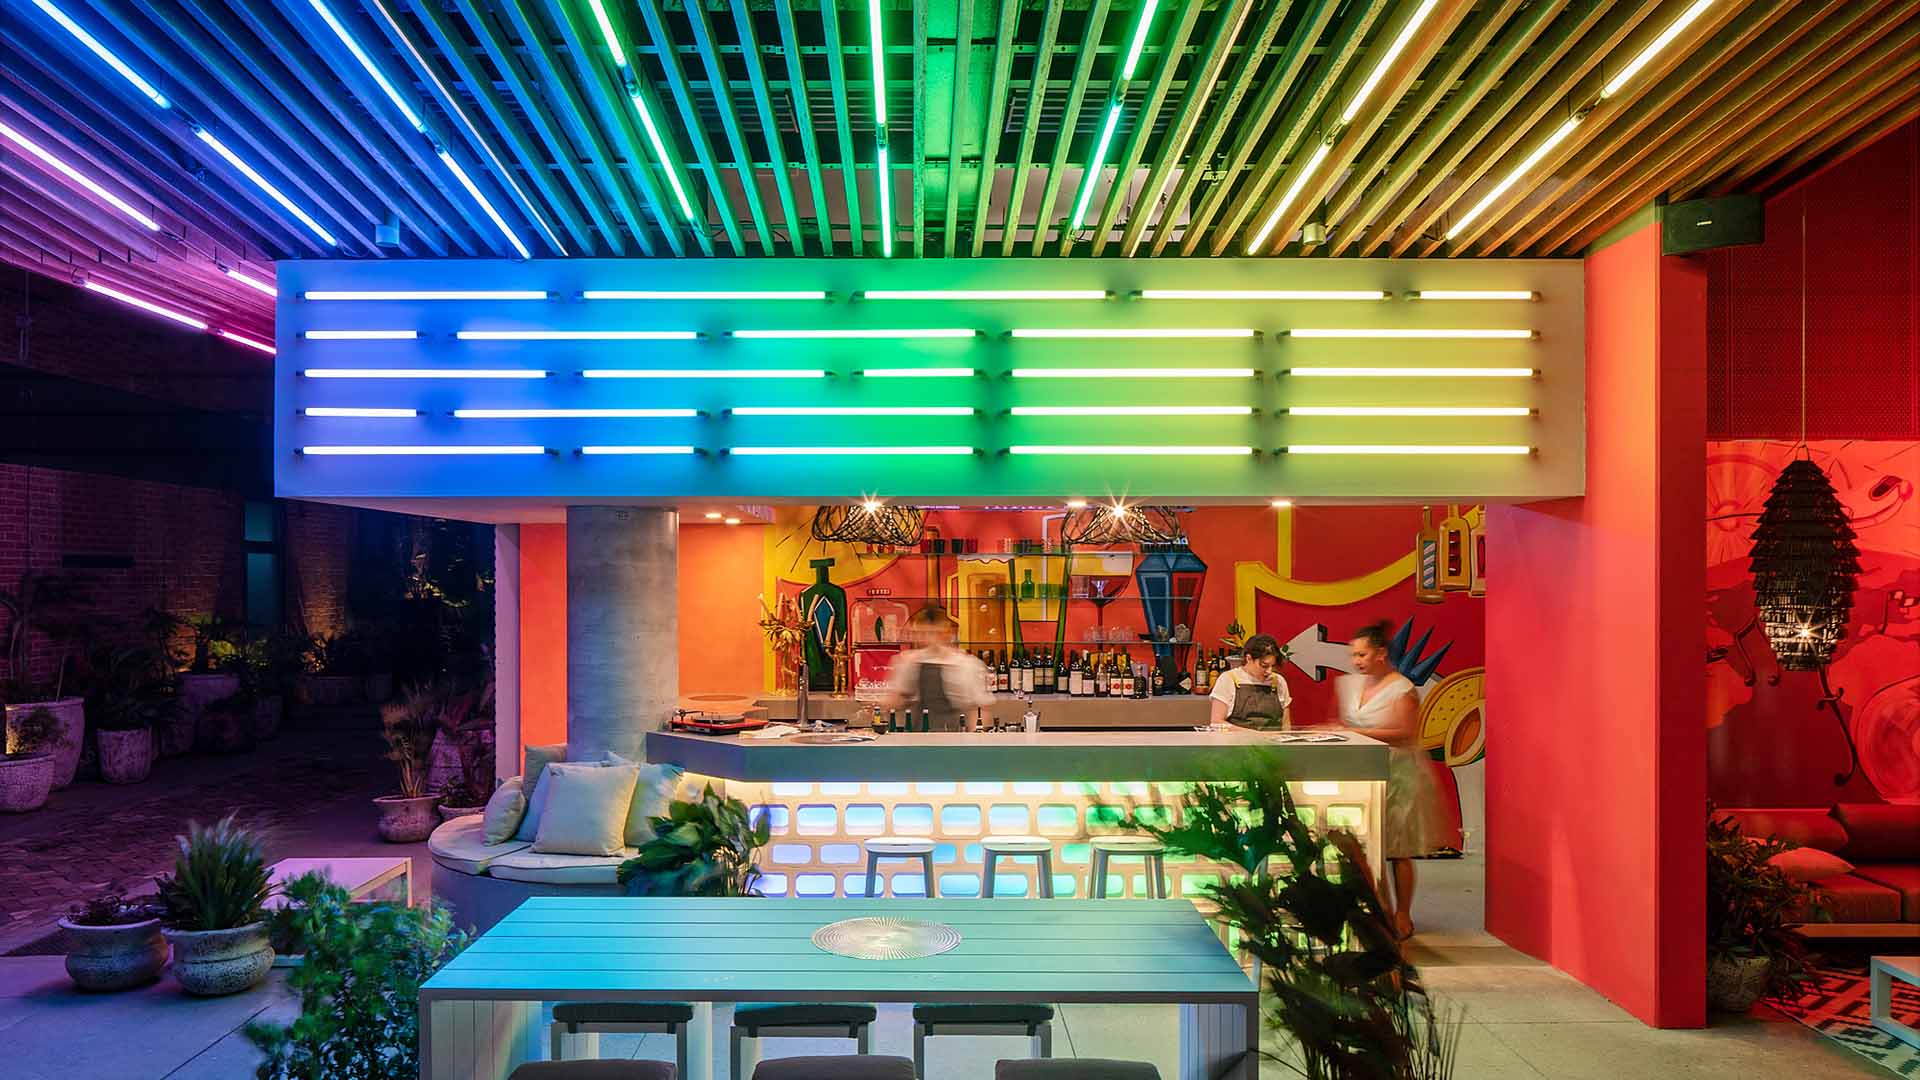 Fredericks Is West End's New Neon Pop-Up Bar Inspired by Old-School Ice Cream